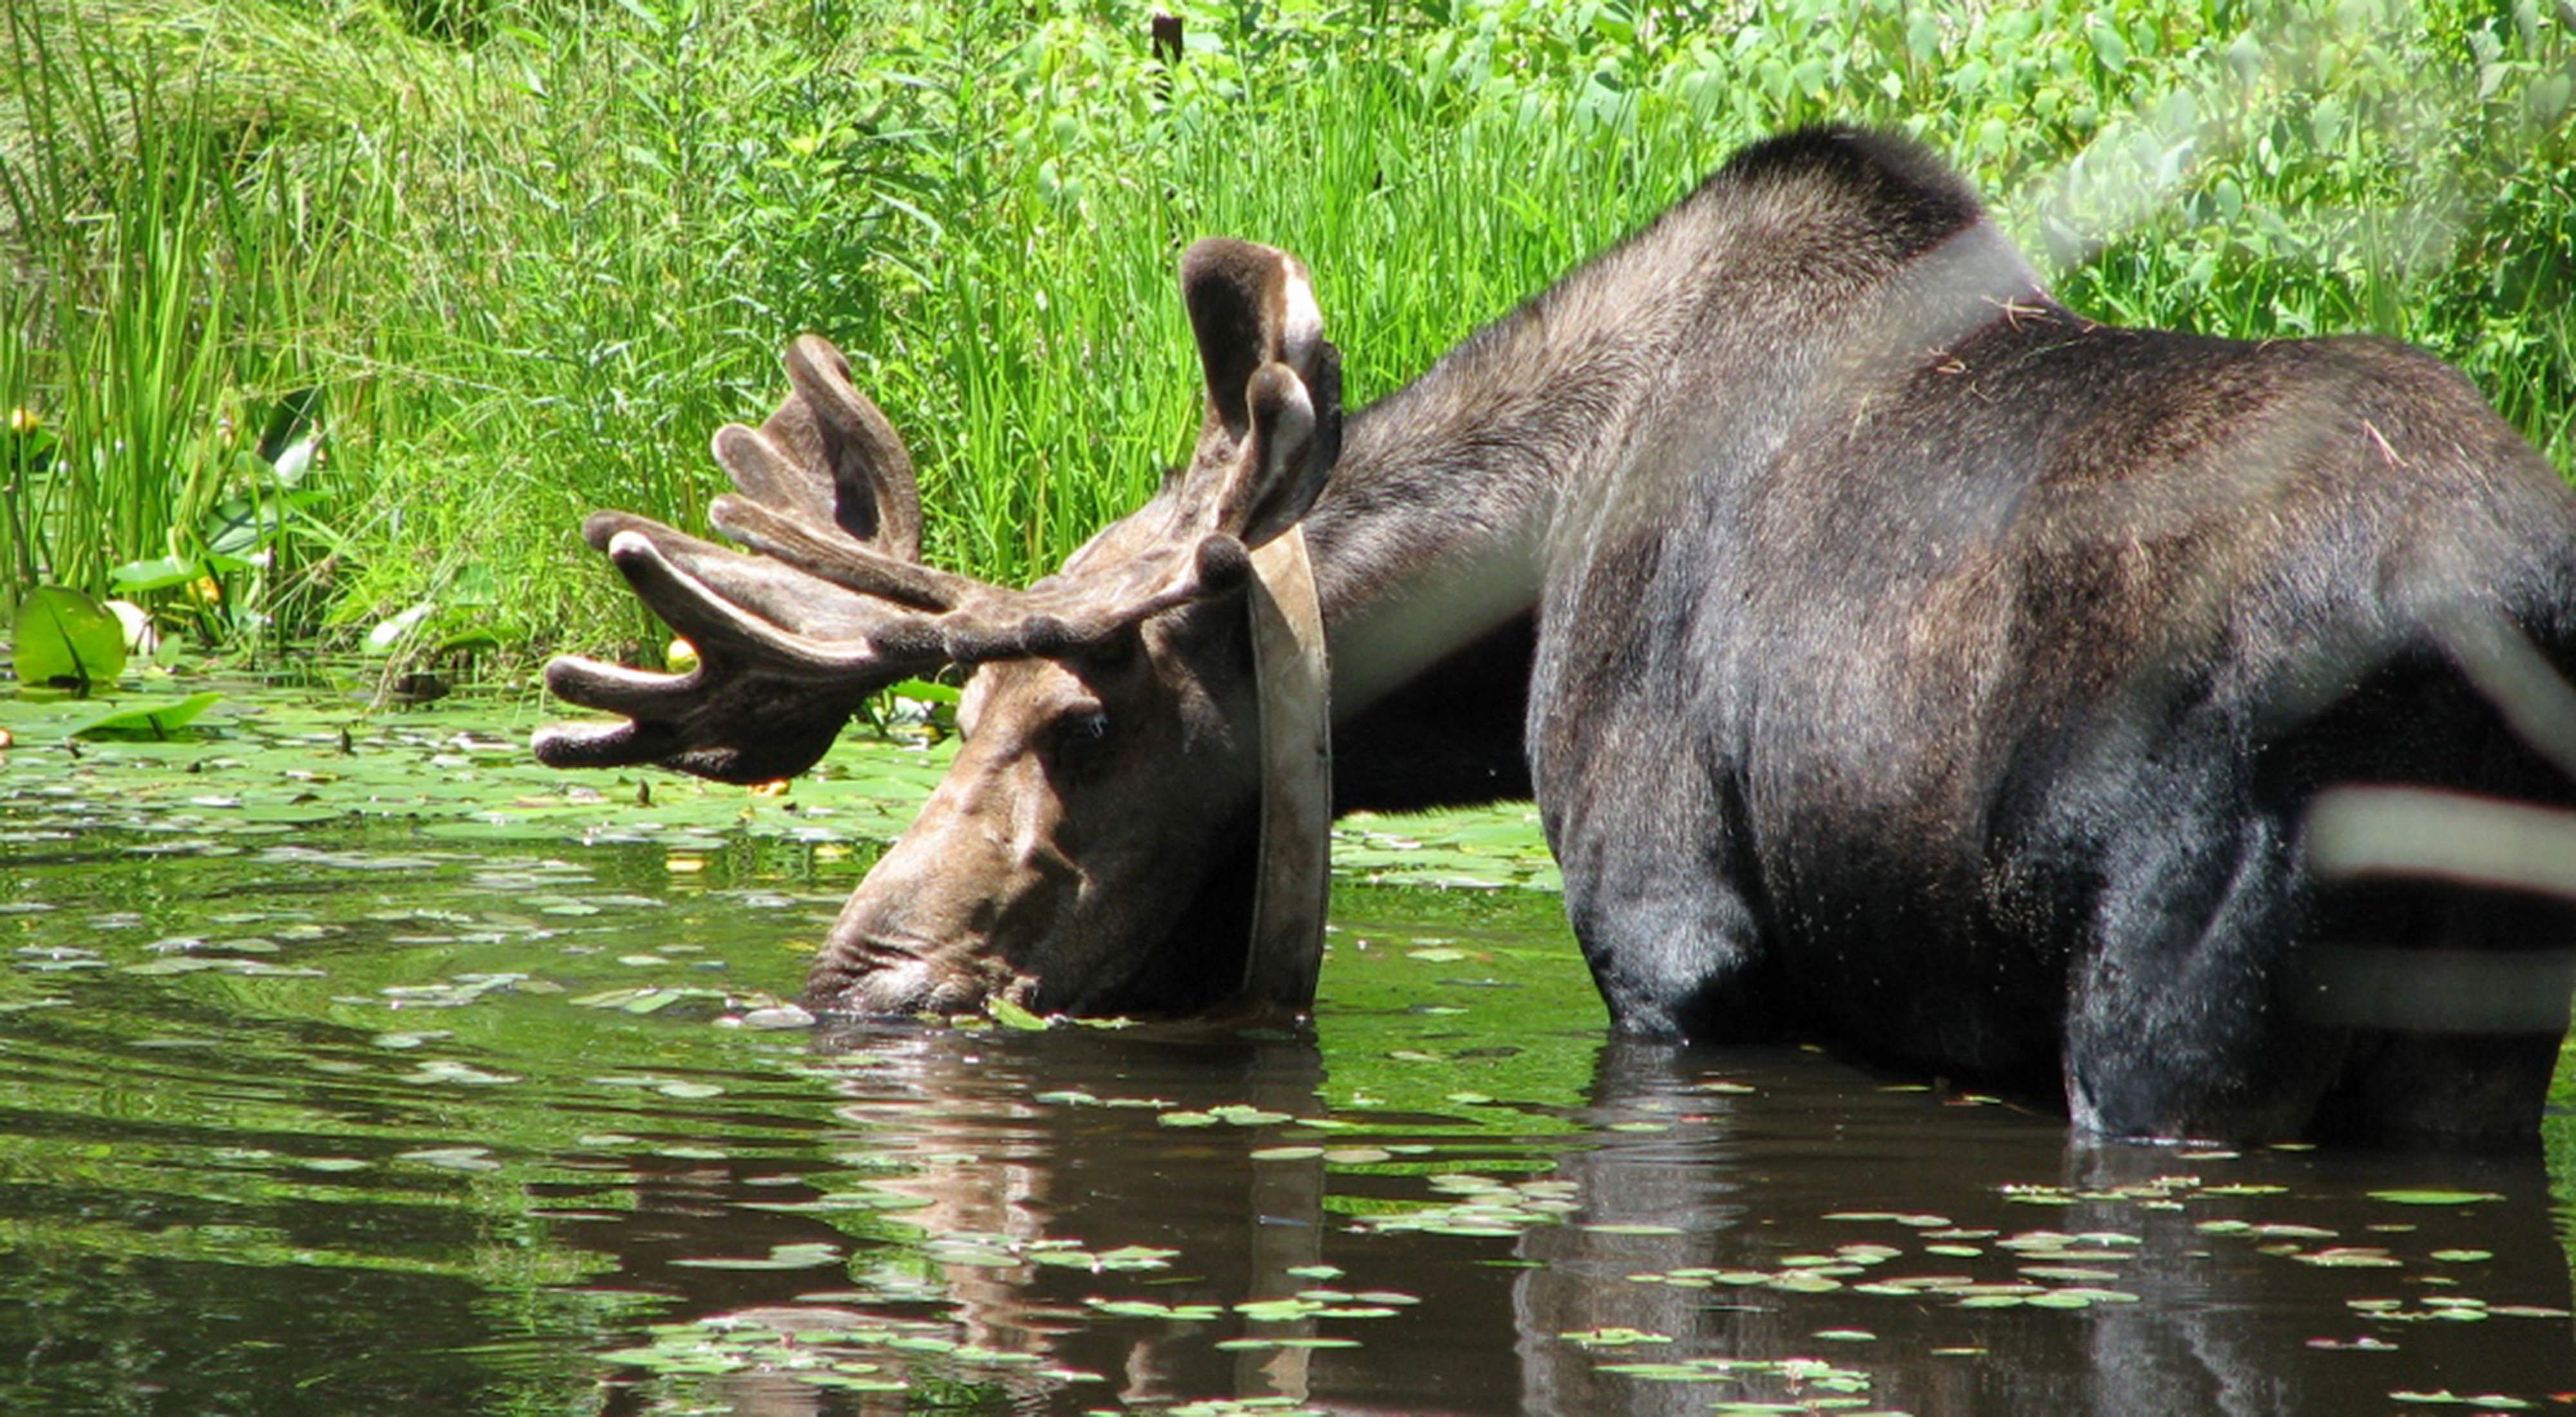 An adult male moose drinks water in a pond in Massachusetts.